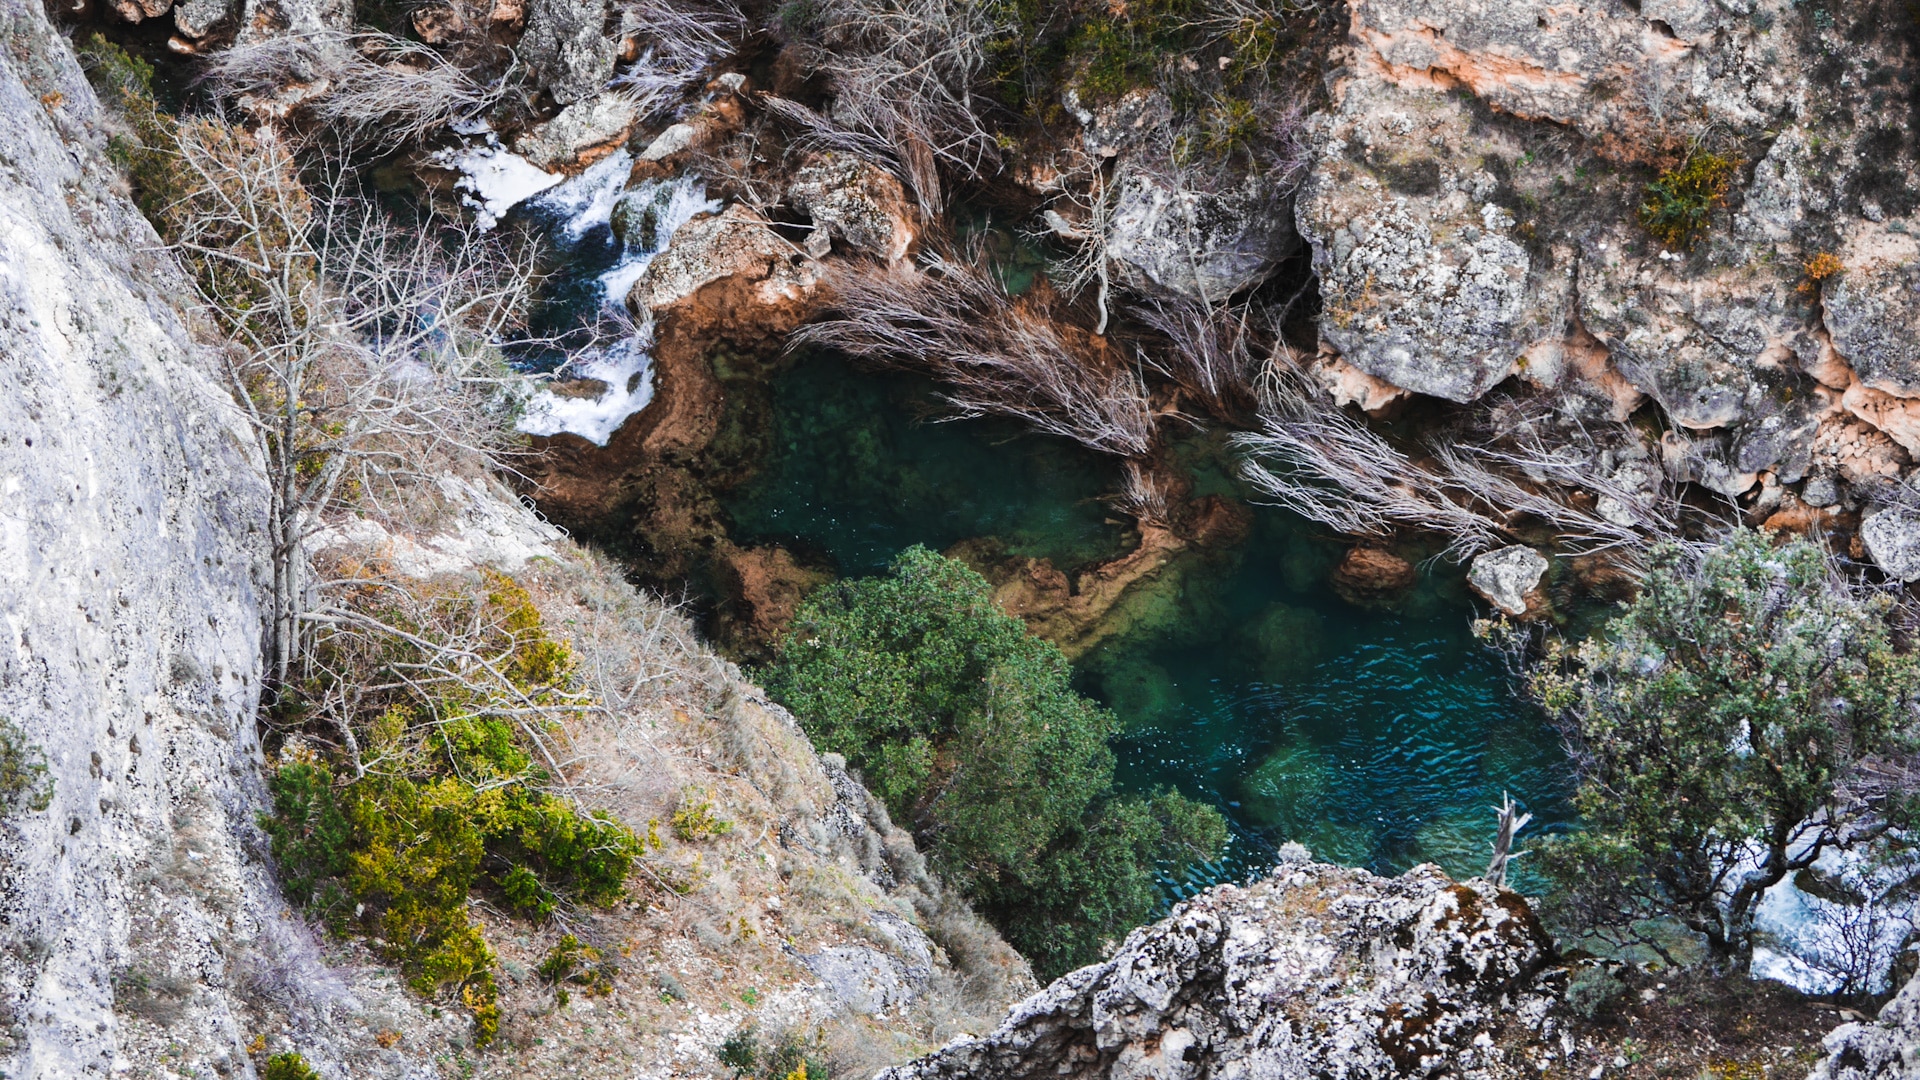 Serranía de Cuenca Natural Park is one of the most beautiful natural spaces in the province of Cuenca